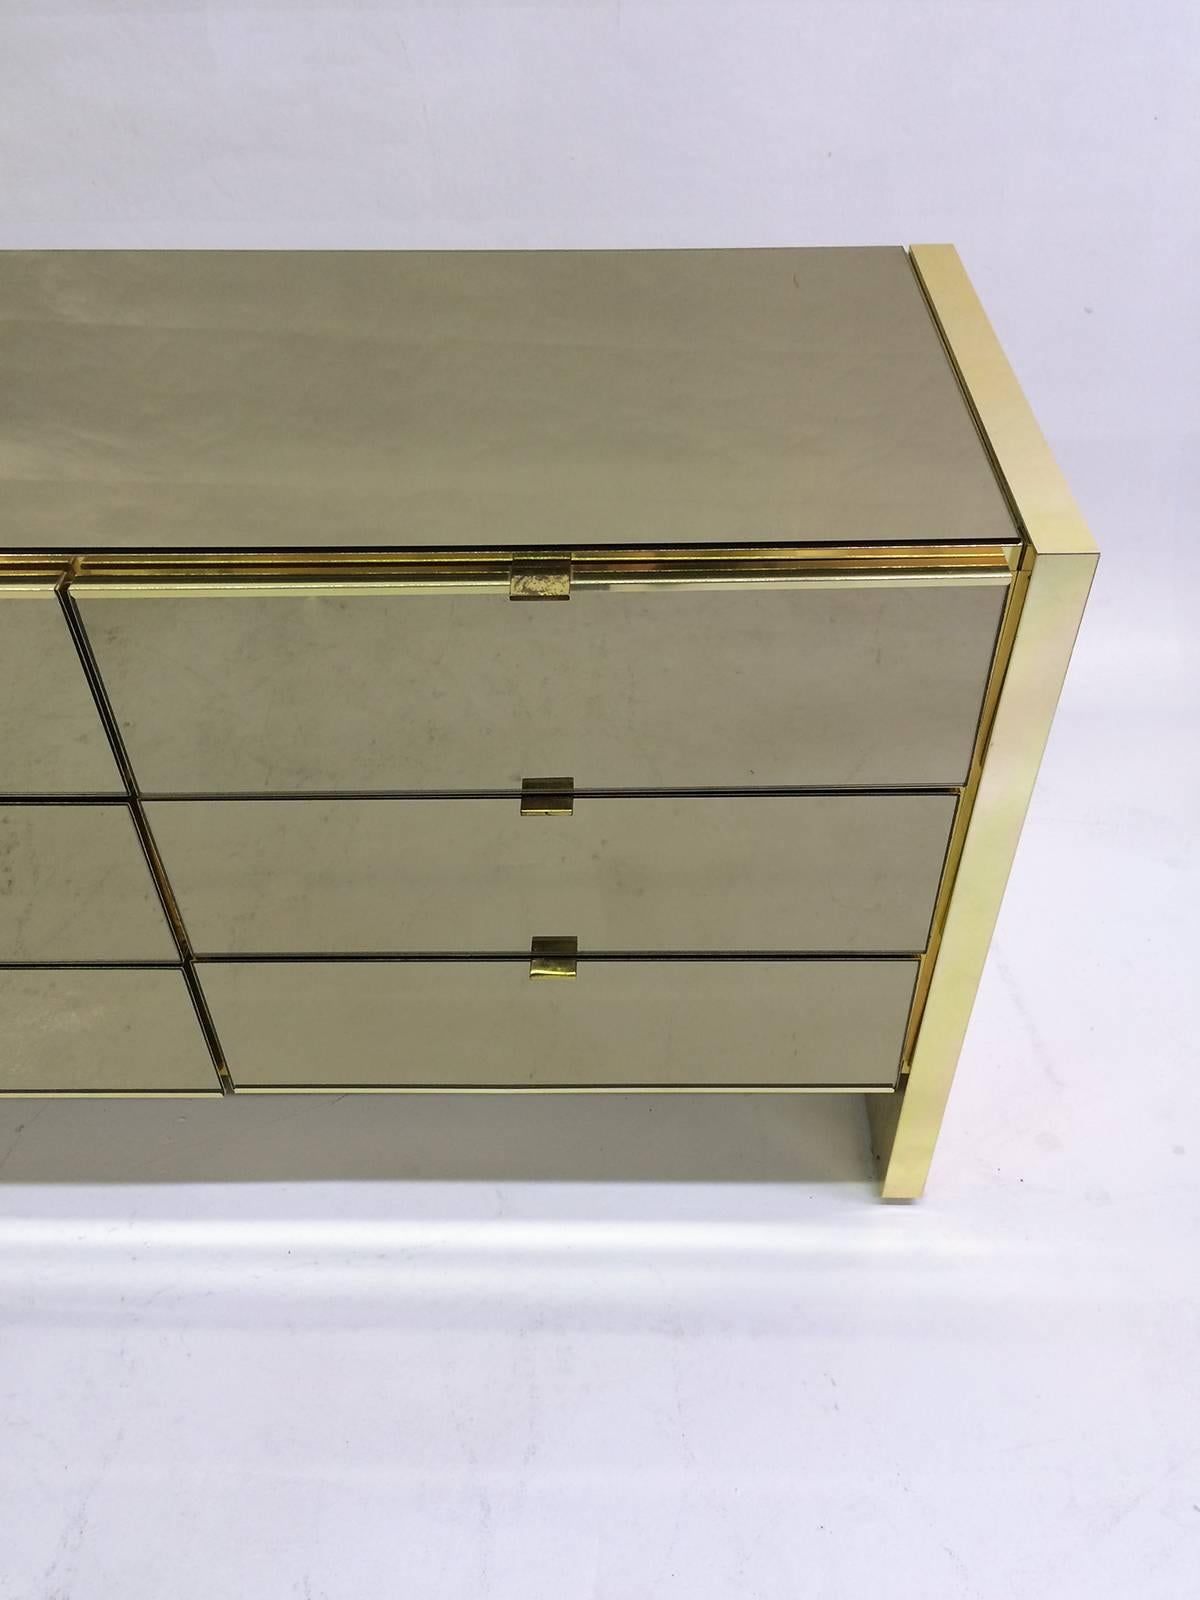 This is a nine drawer dresser made of smoked mirror and polished brass by Ello Furniture which was founded in 1955 in Chicago, IL.